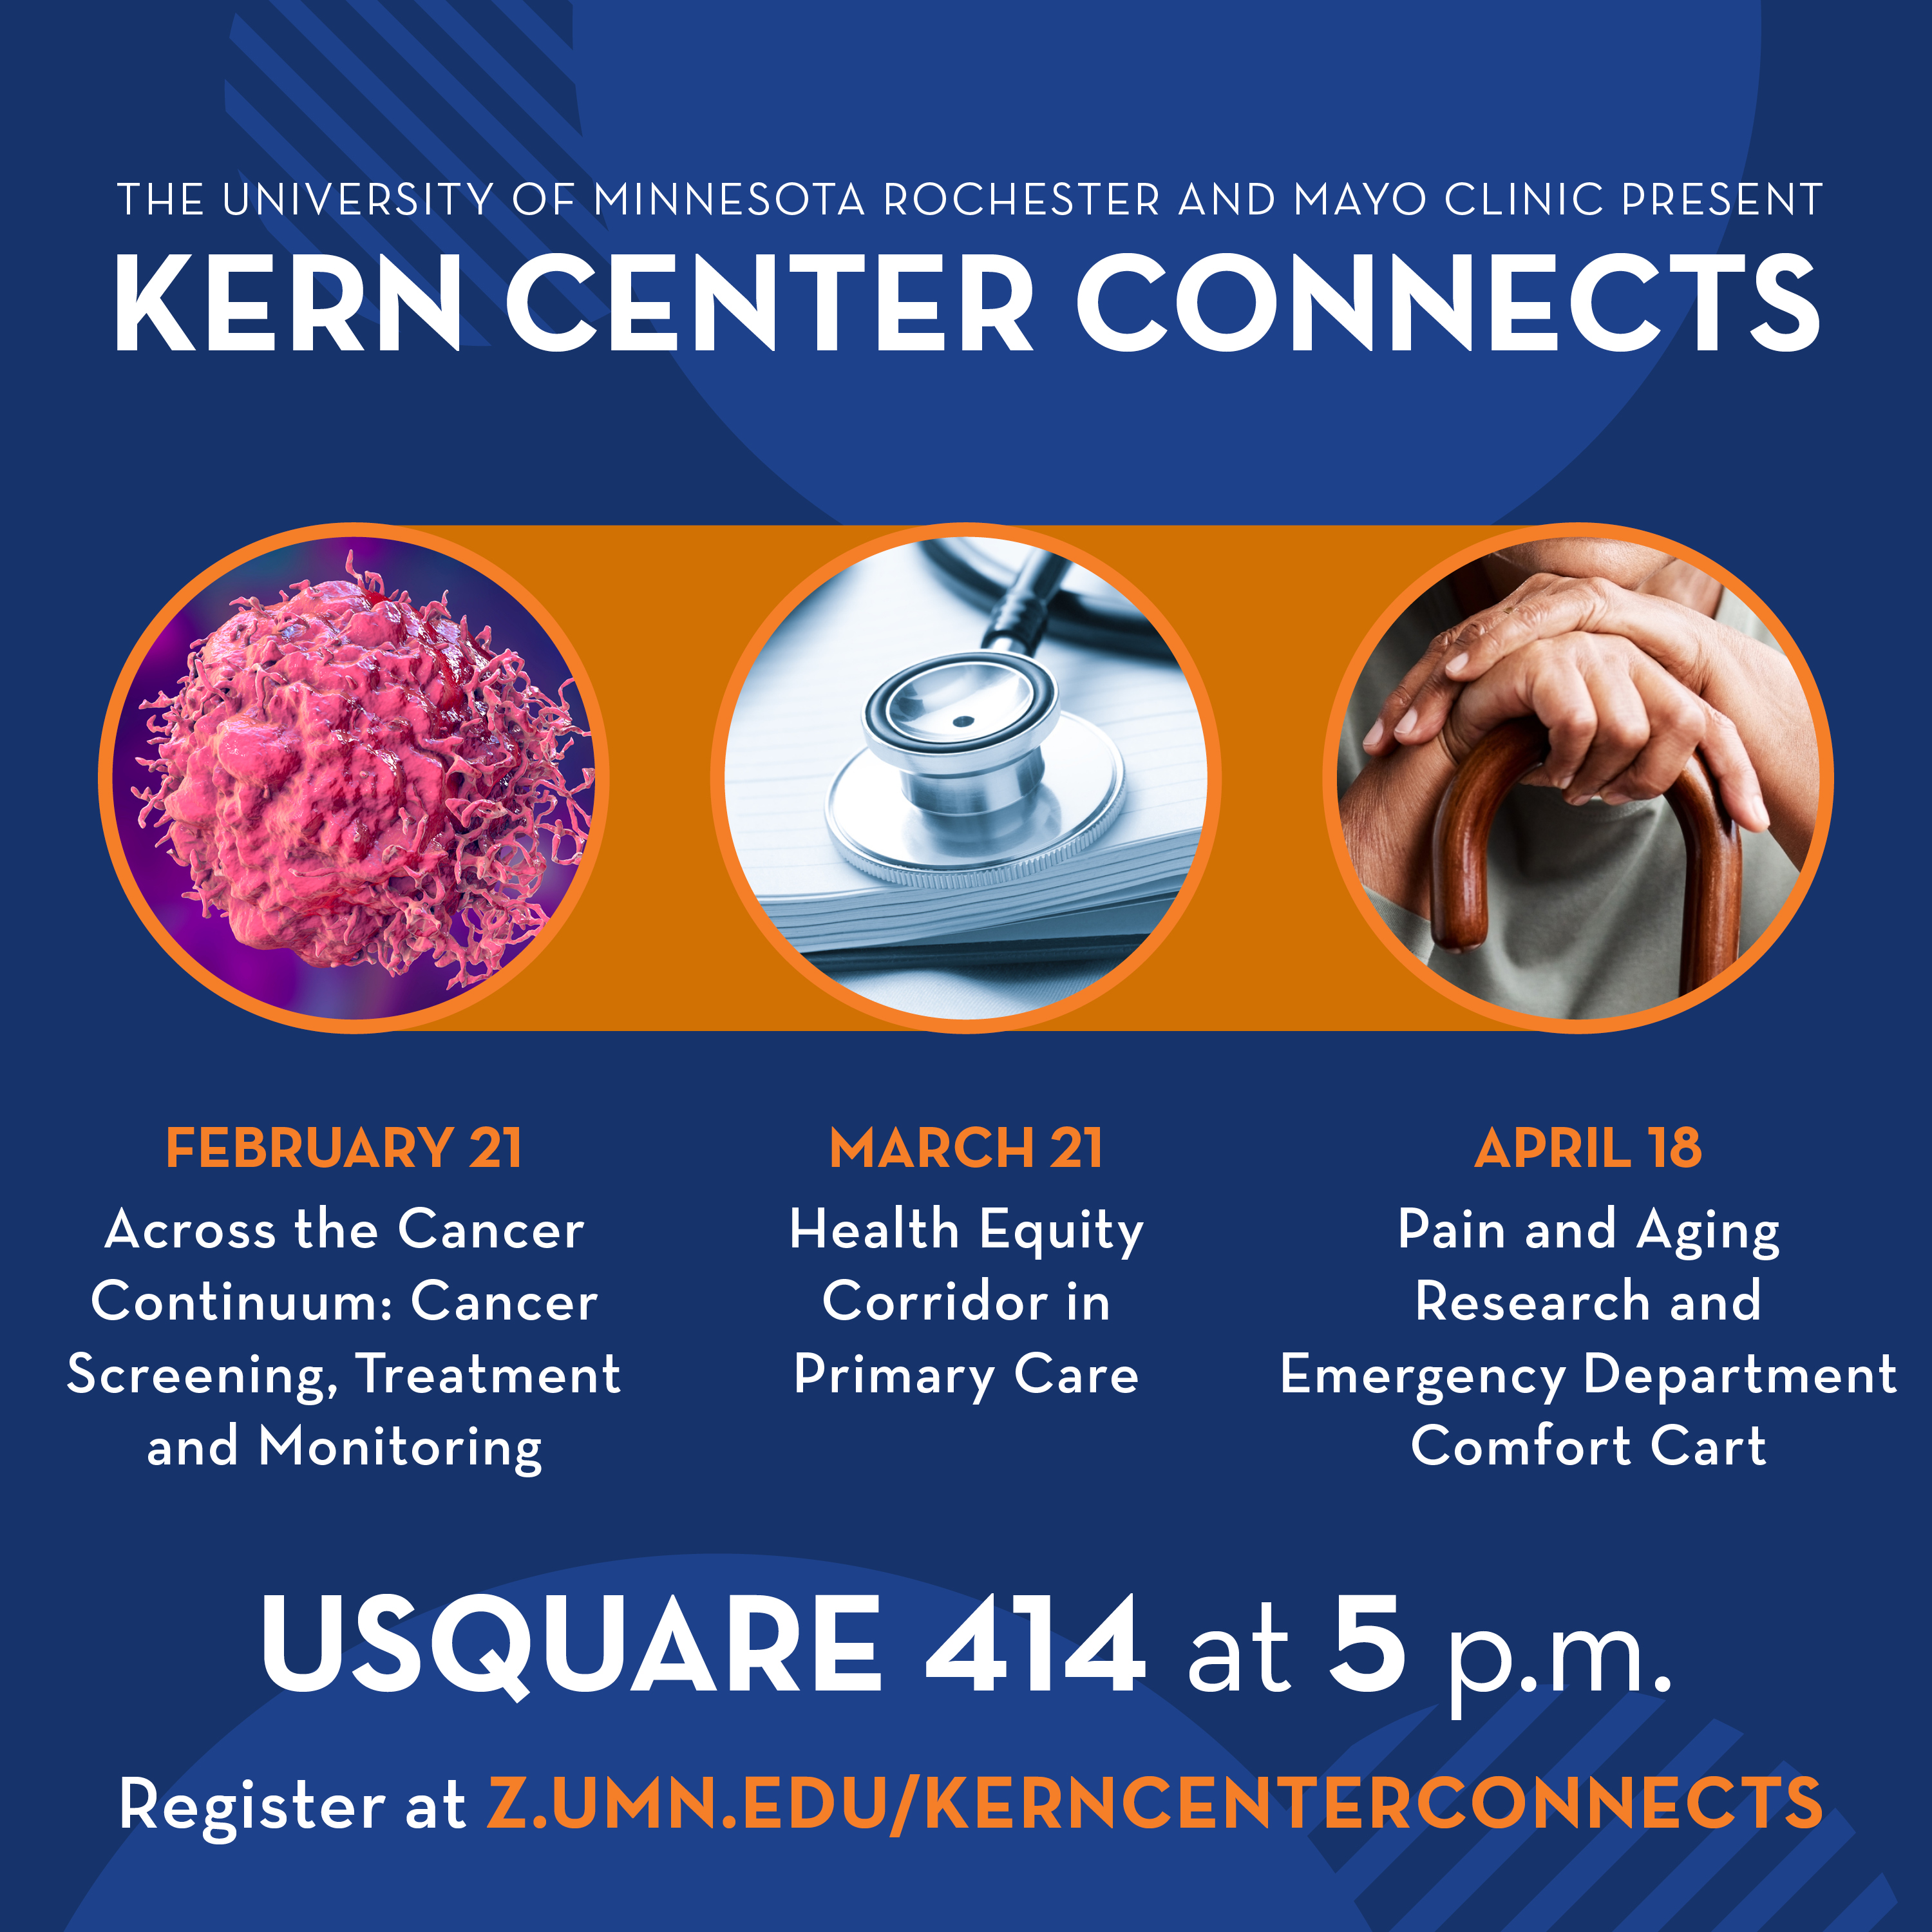 UMR flyer of seminars for the Kern Center Connects